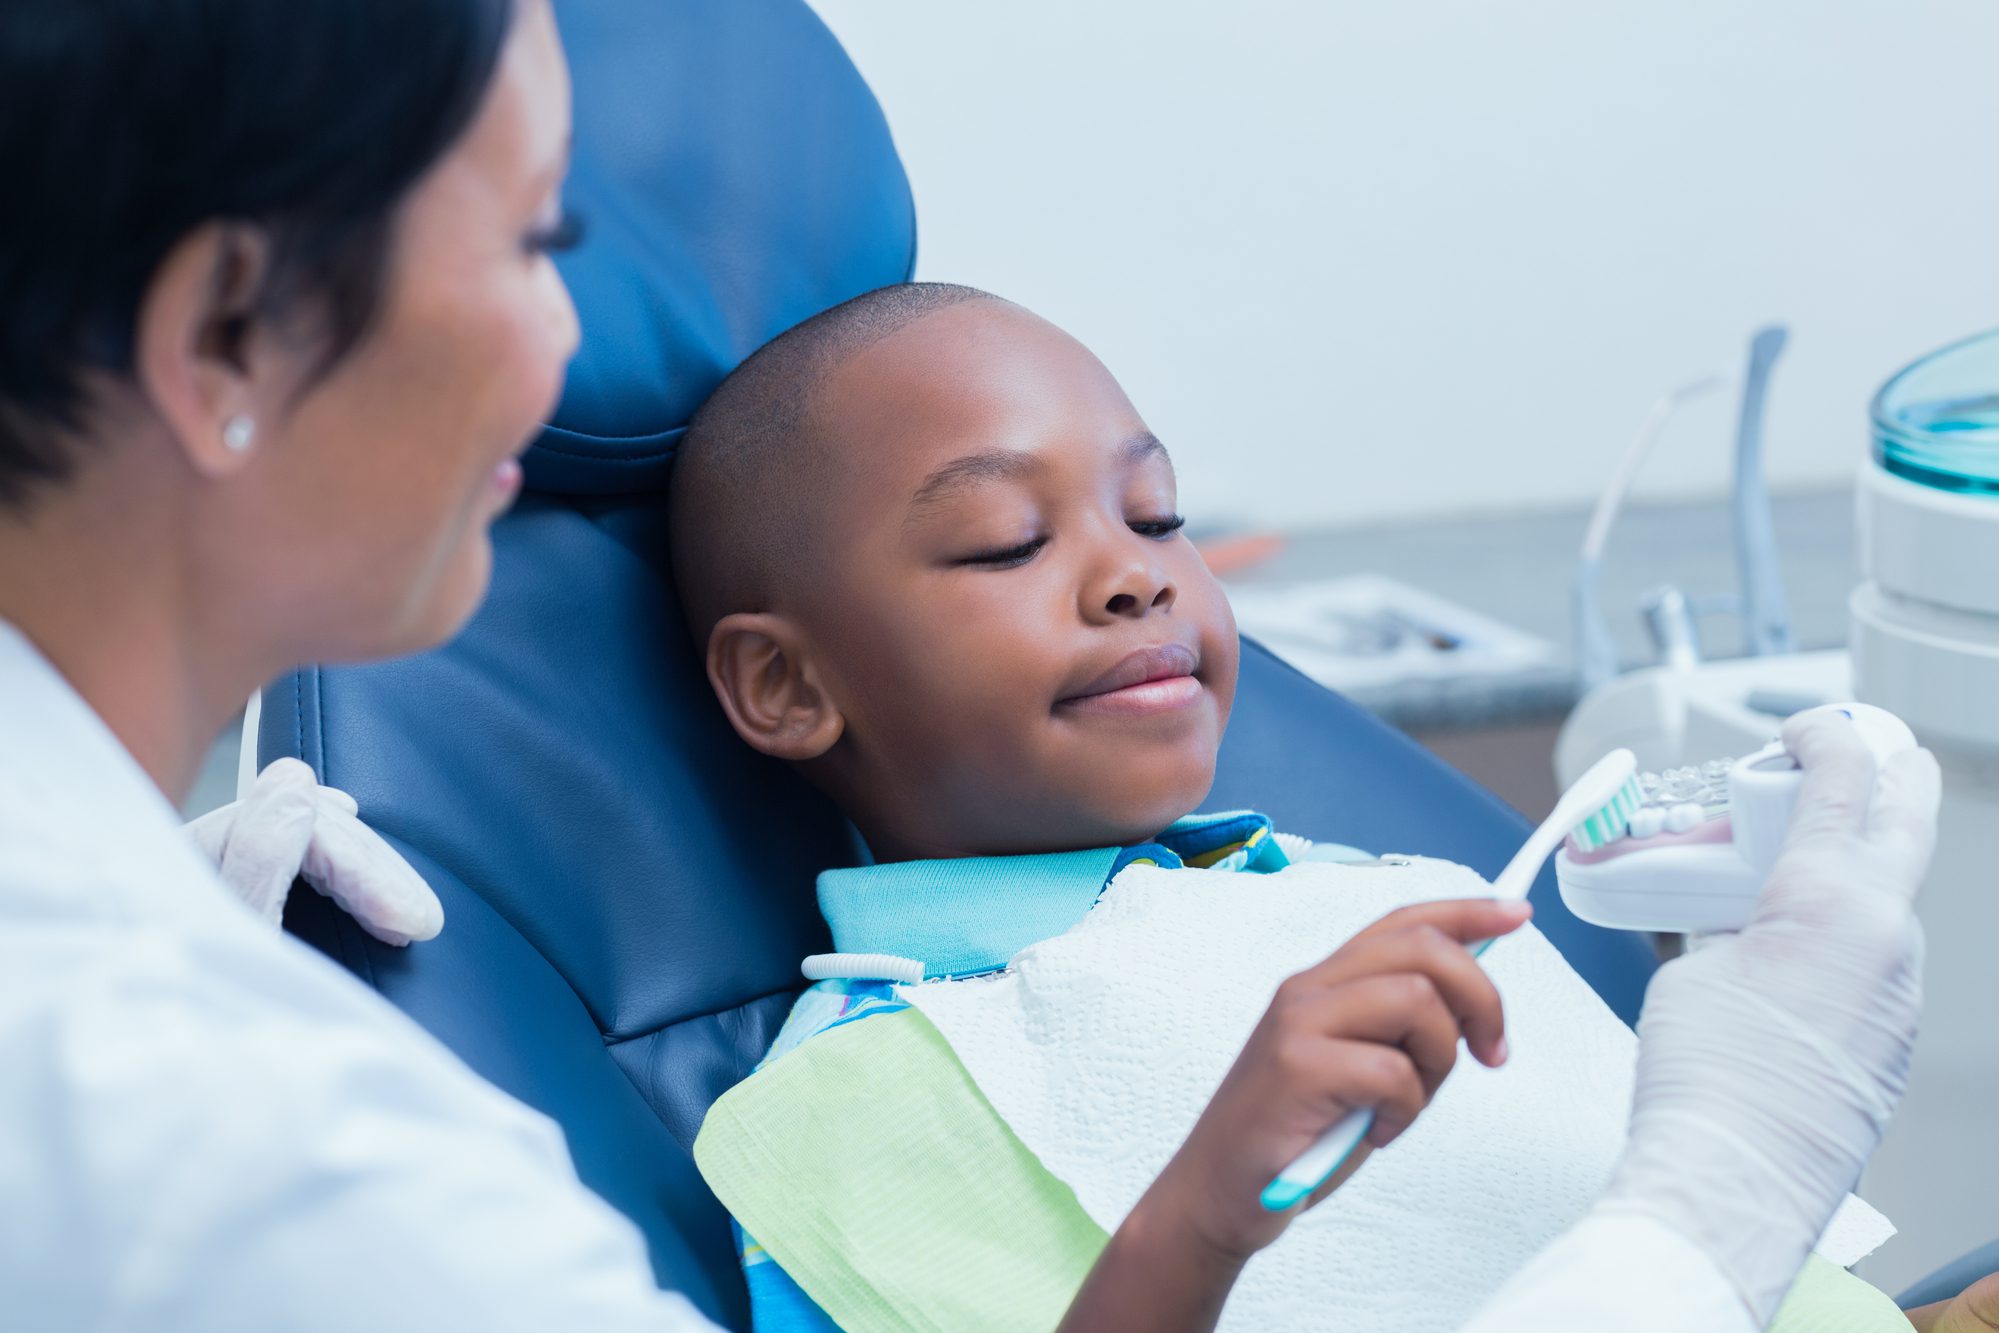 Female dental hygienist showing young boy how to clean teeth